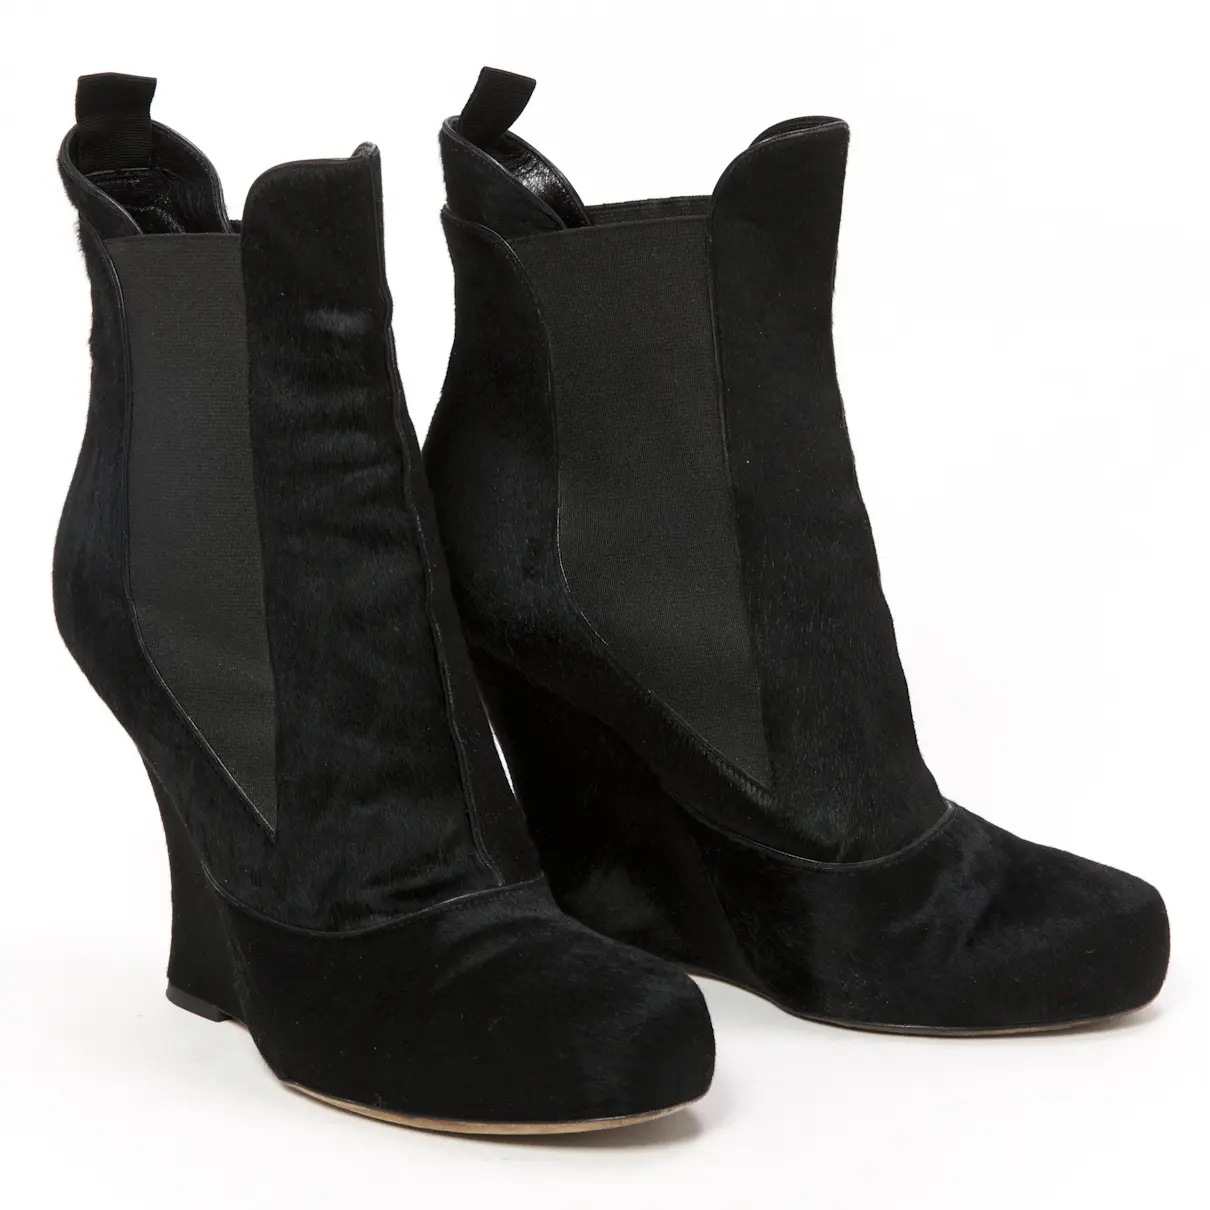 Tabitha Simmons Pony-style calfskin ankle boots for sale